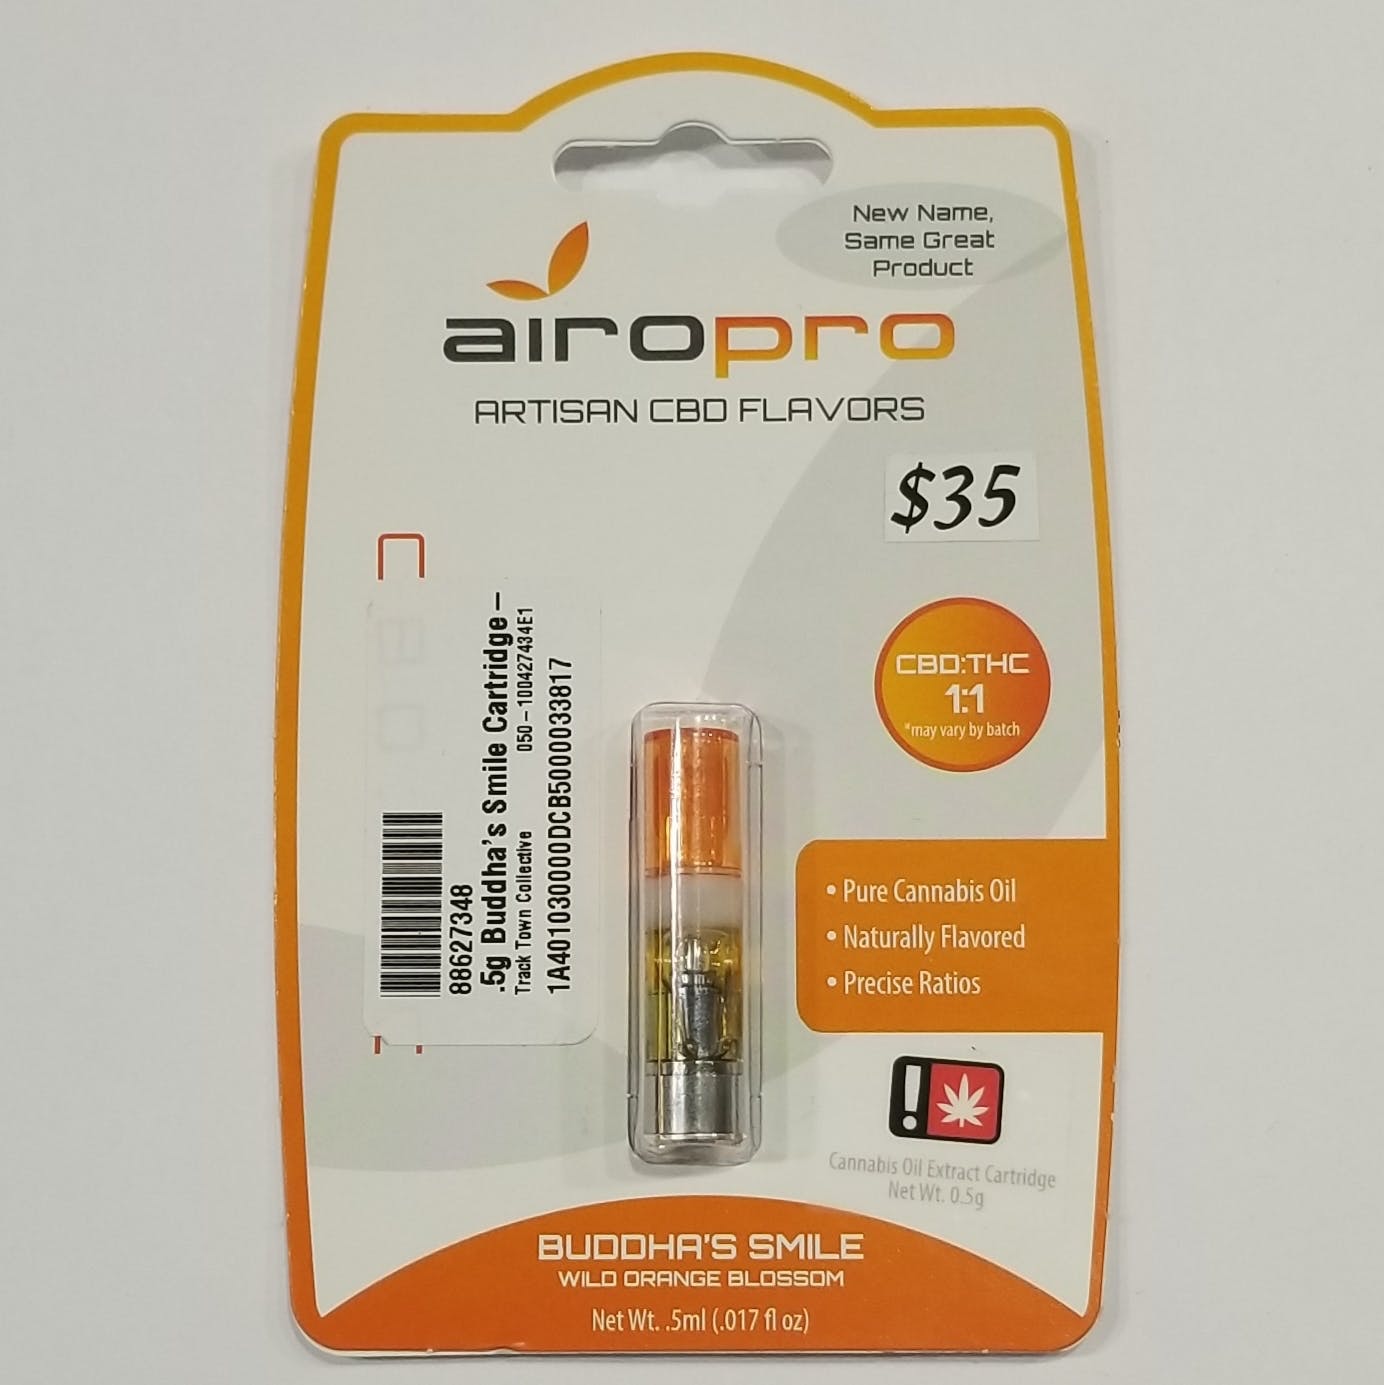 concentrate-5g-buddhas-smile-cartridge-airo-pro